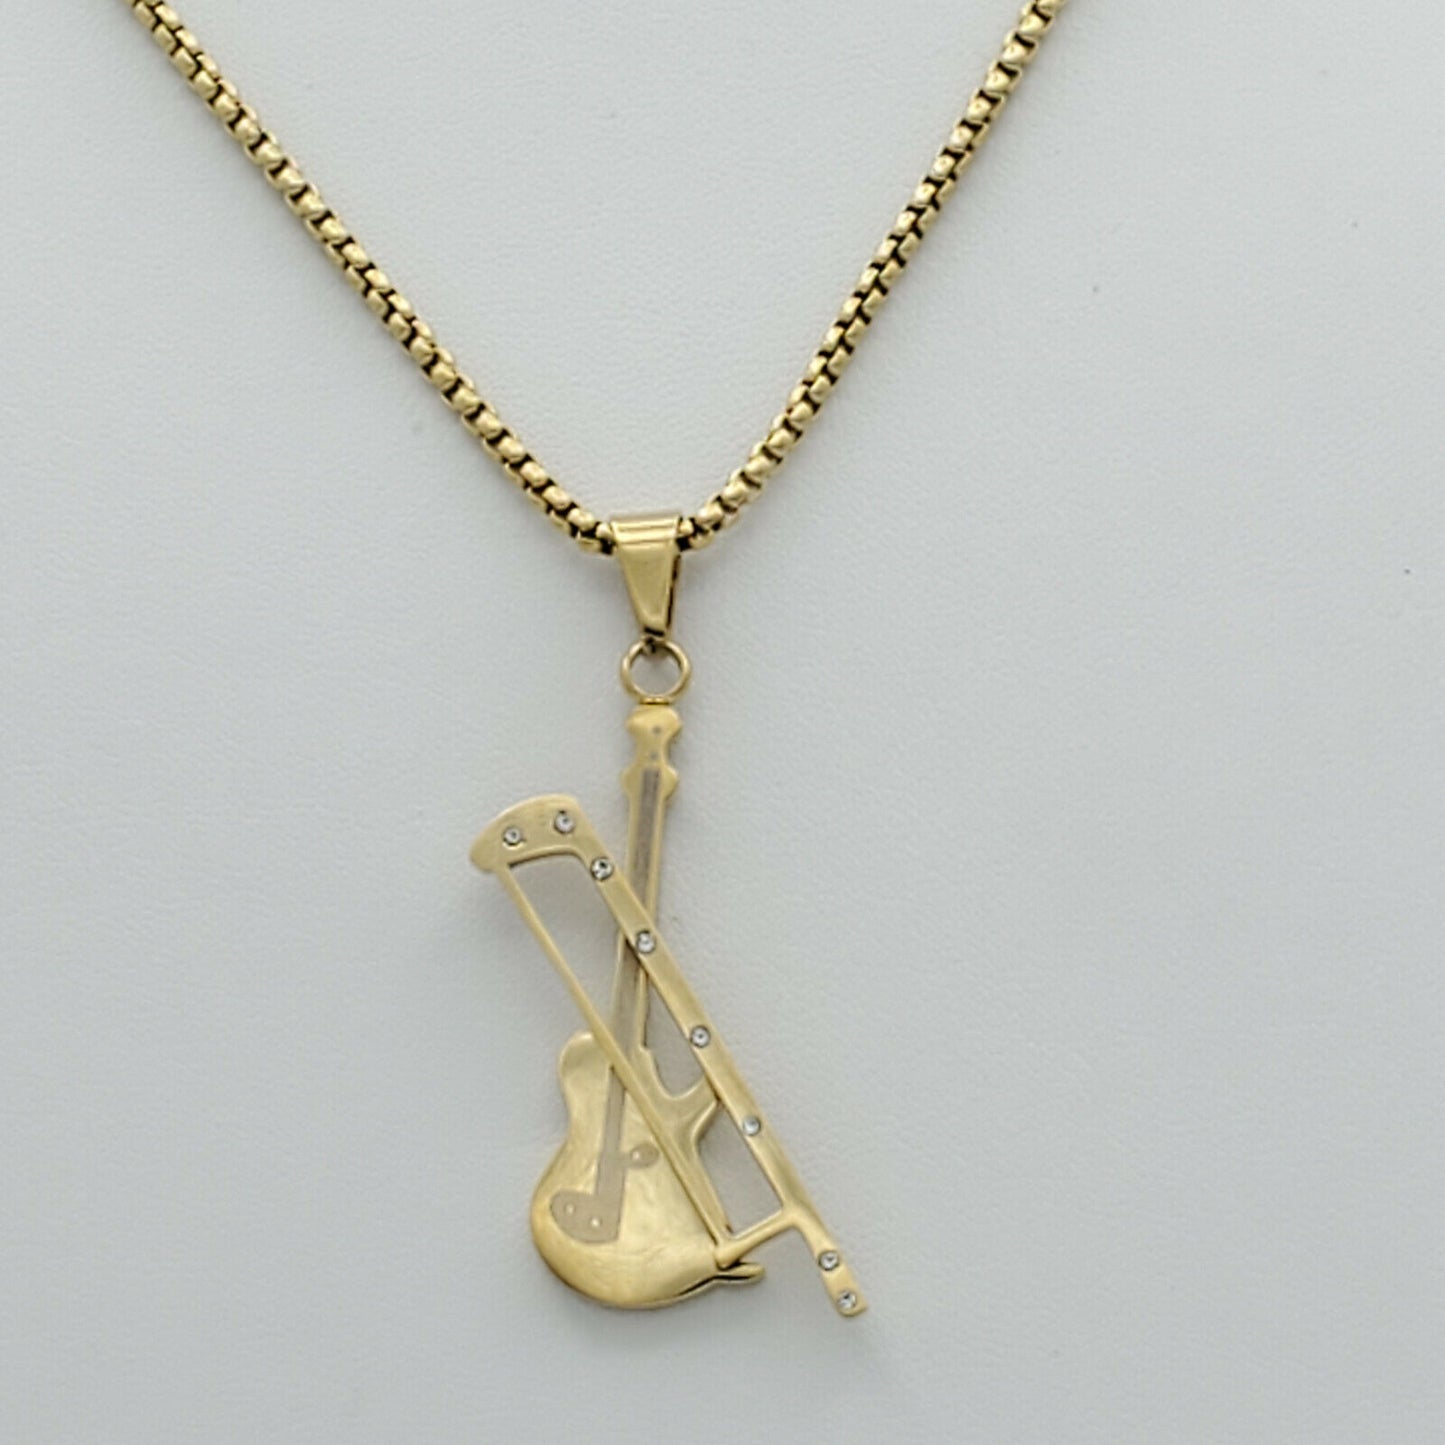 Necklaces - Stainless Steel Gold Plated. Violin Pendant & Chain - Music Lover